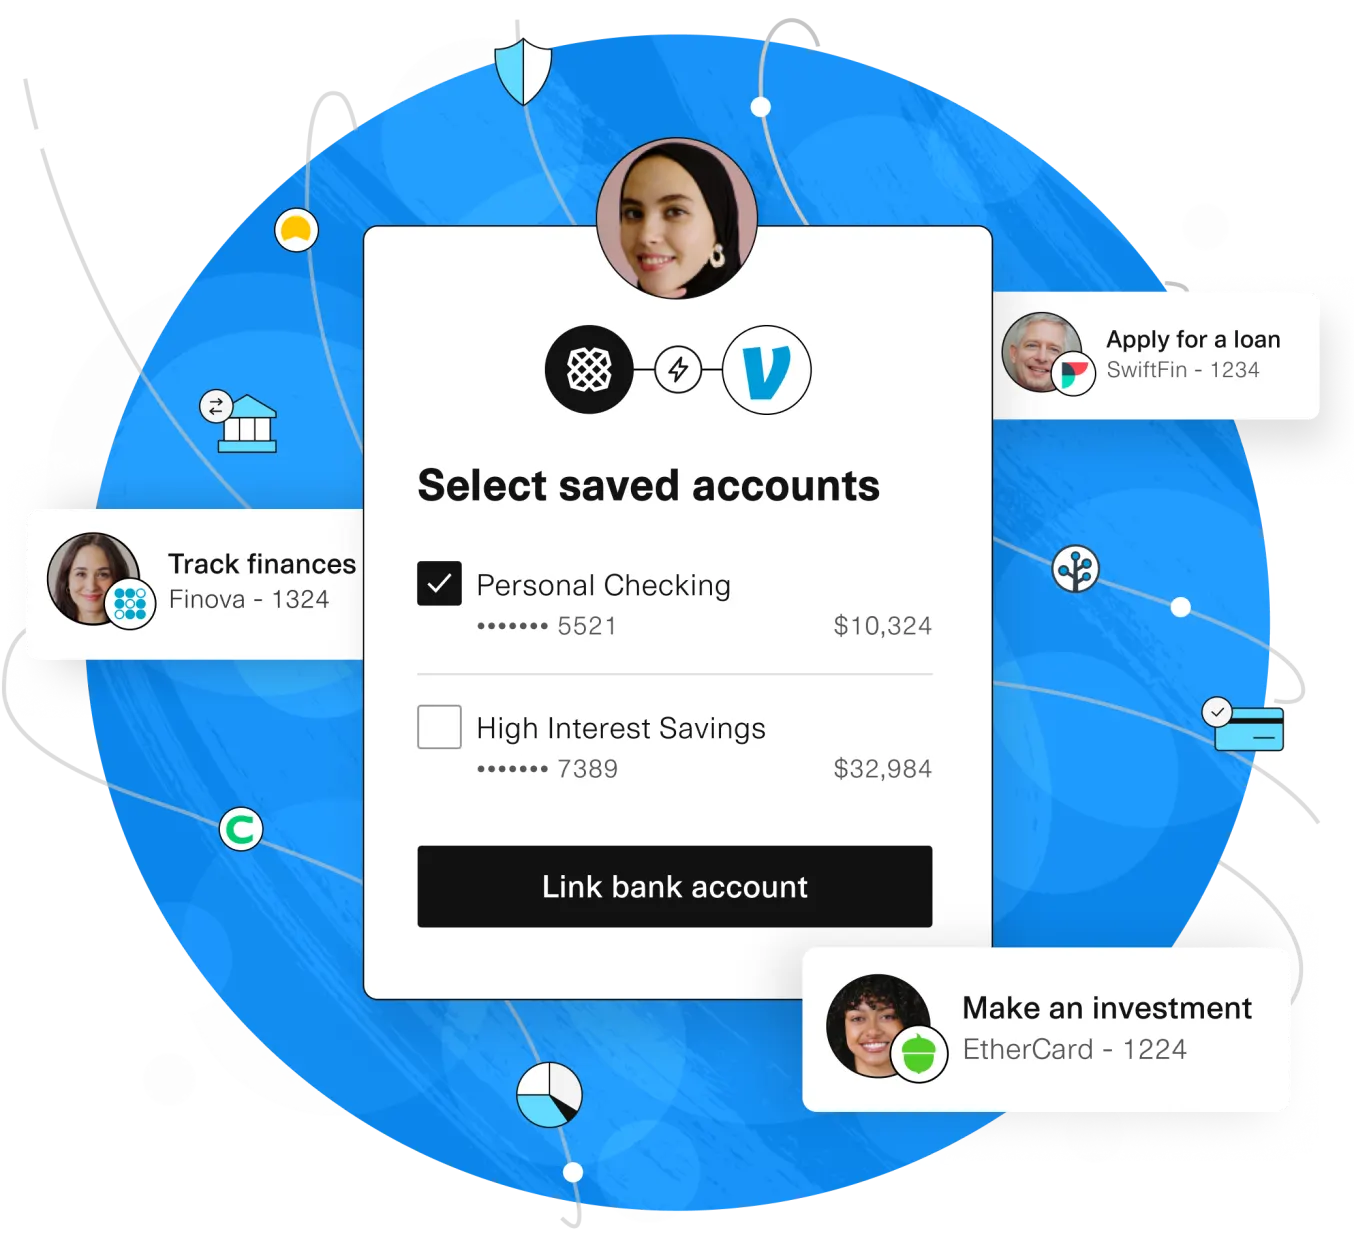 A financial interface where users can select between a "Personal Checking" and "High Interest Savings" account. Surrounding options include tracking finances, applying for a loan, and making an investment with respective service providers. The design is set against a blue and white abstract background, and three profile images of individuals are linked to the services.